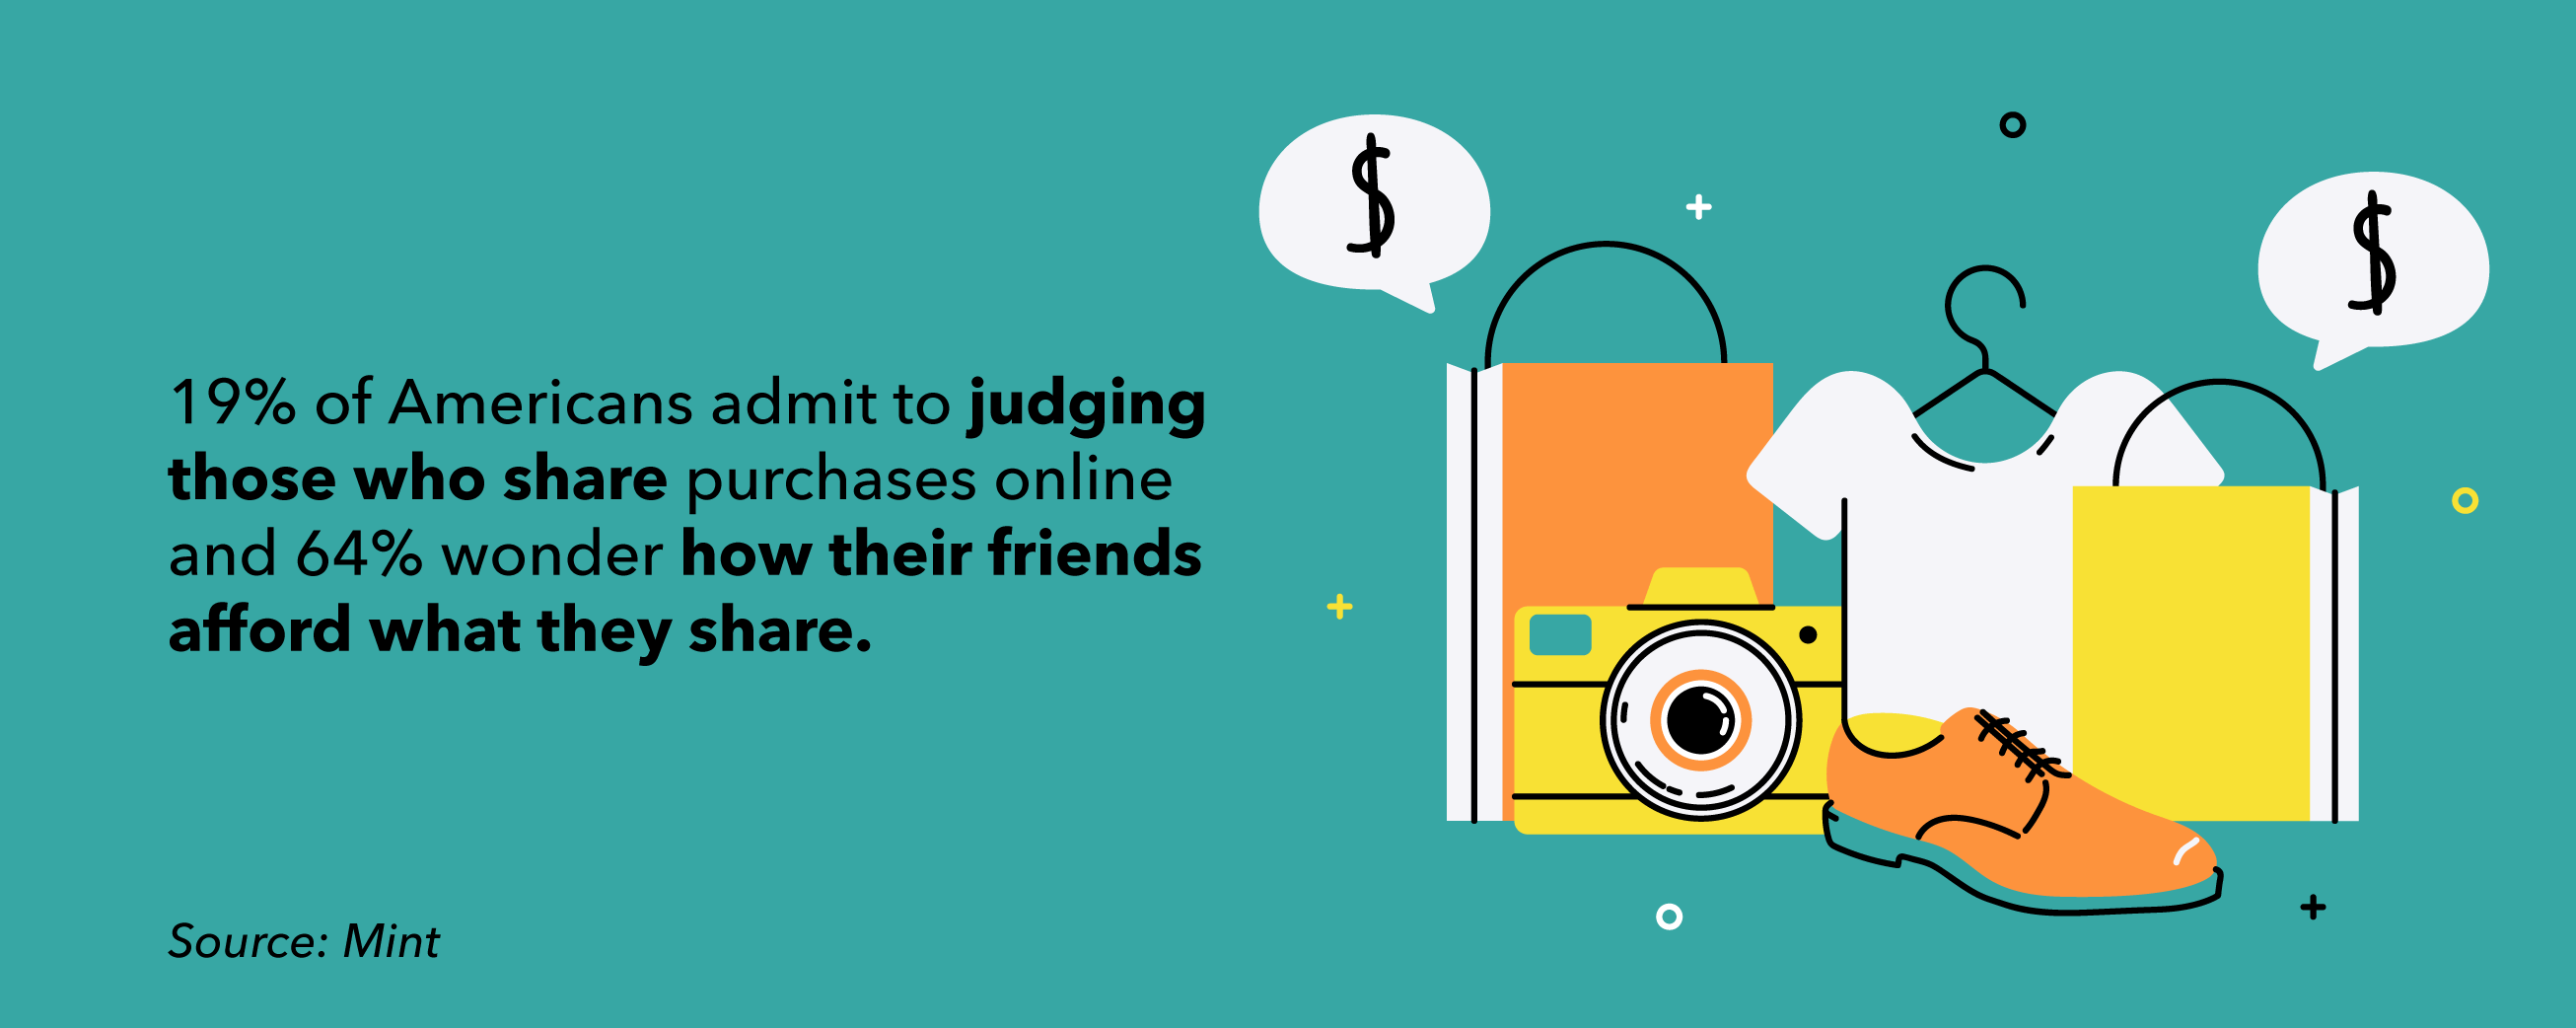 20% of users judge others for sharing their purchases, 64% wonder how their friends afford these purchases